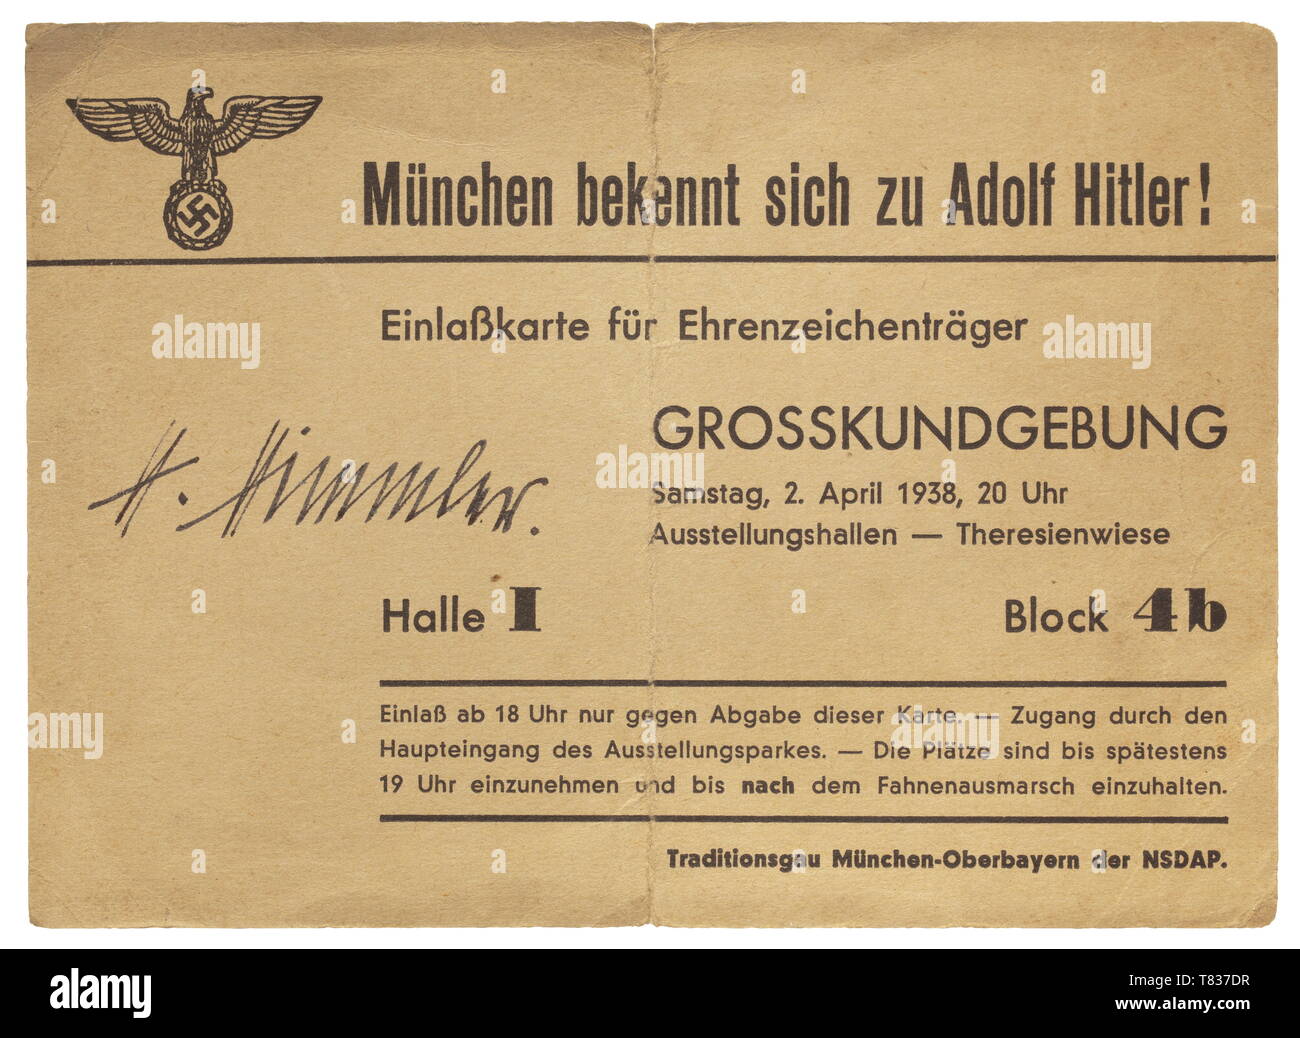 Heinrich Himmler An original signature in ink on an honour award winner's admission card for a mass rally of the NSDAP of the traditional Gau (district) Munich-Upper Bavaria on 2 April 1938. historic, historical, 20th century, 1930s, NS, National Socialism, Nazism, Third Reich, German Reich, Germany, German, National Socialist, Nazi, Nazi period, fascism, Editorial-Use-Only Stock Photo